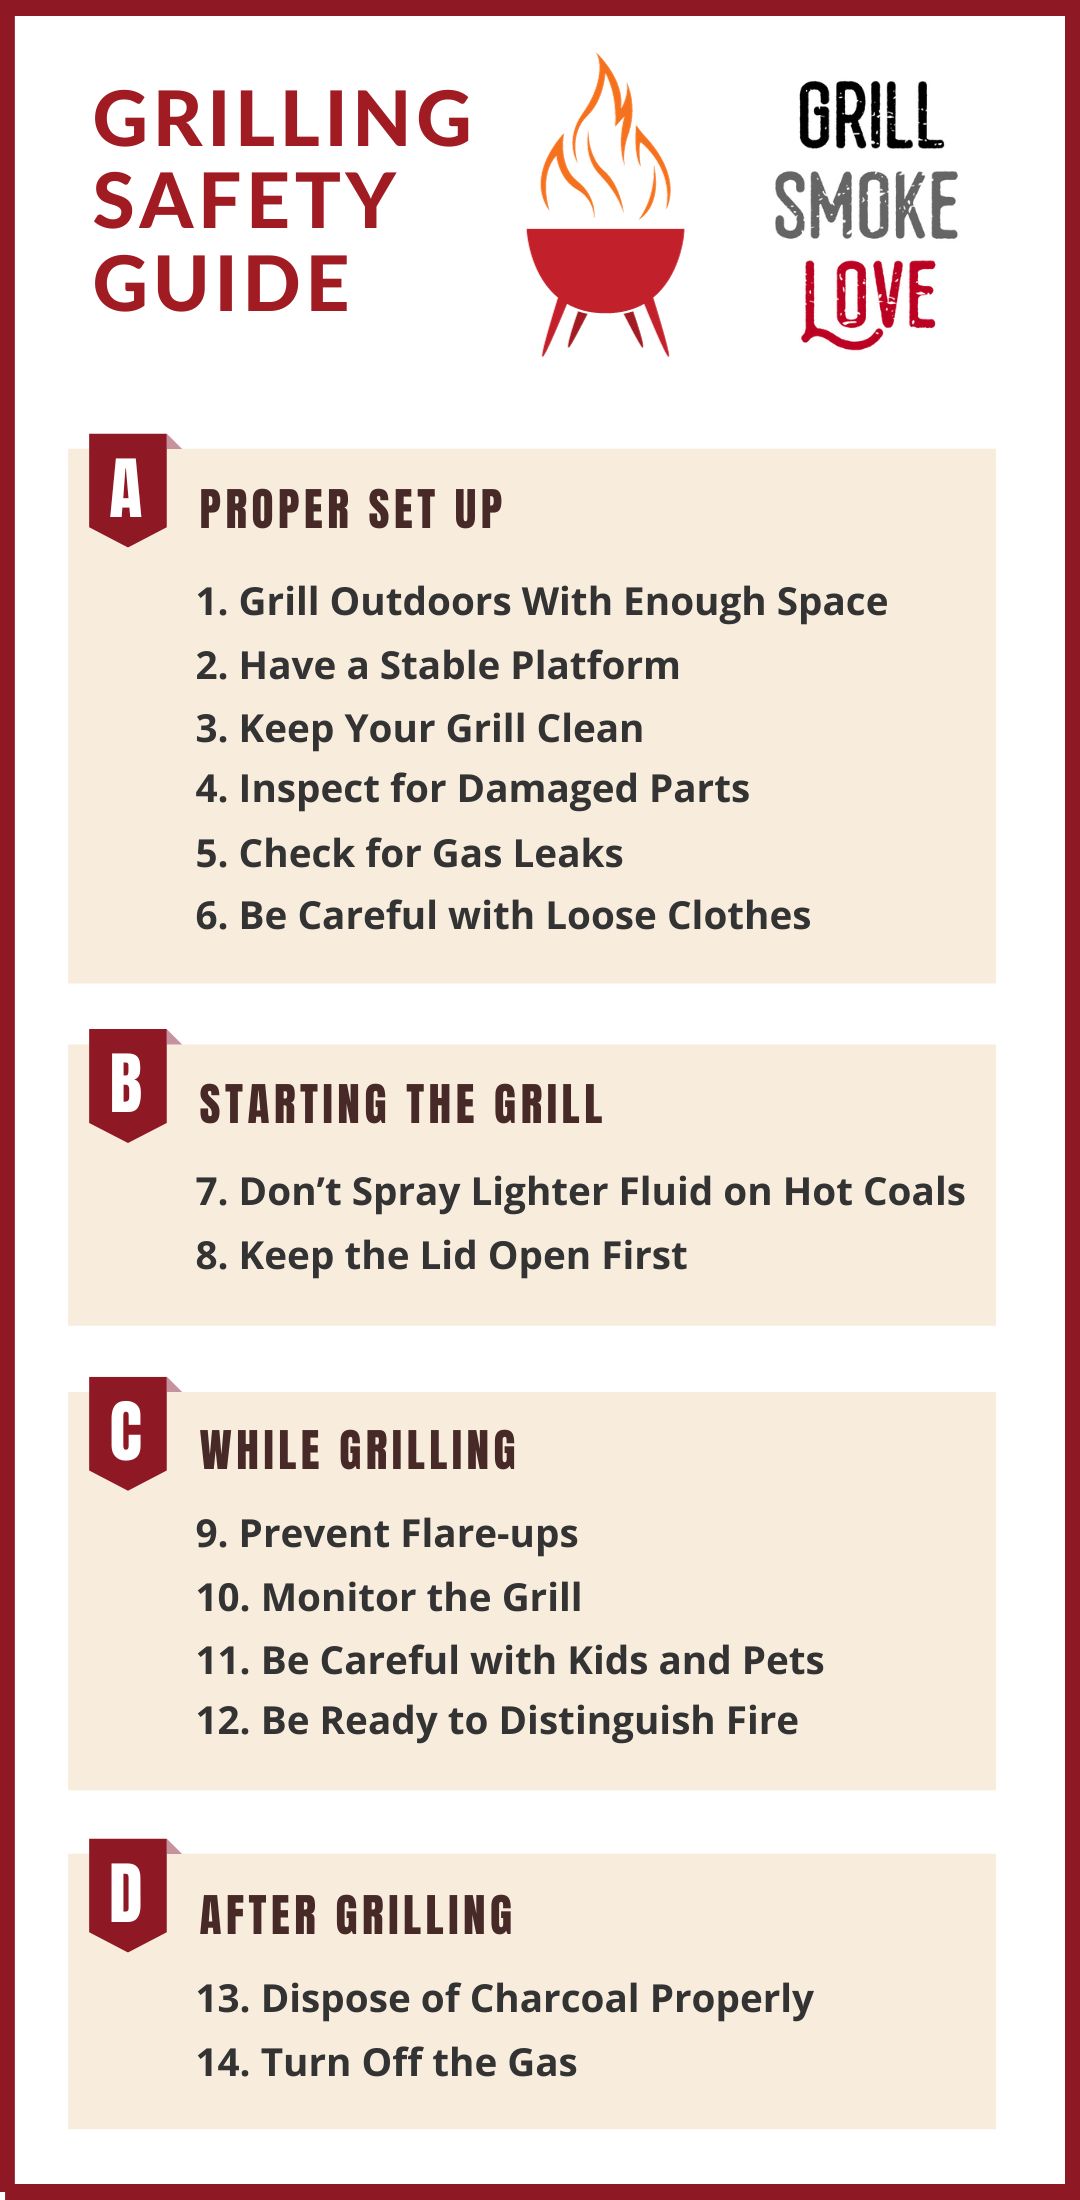 Grilling Safety Guide Infographic